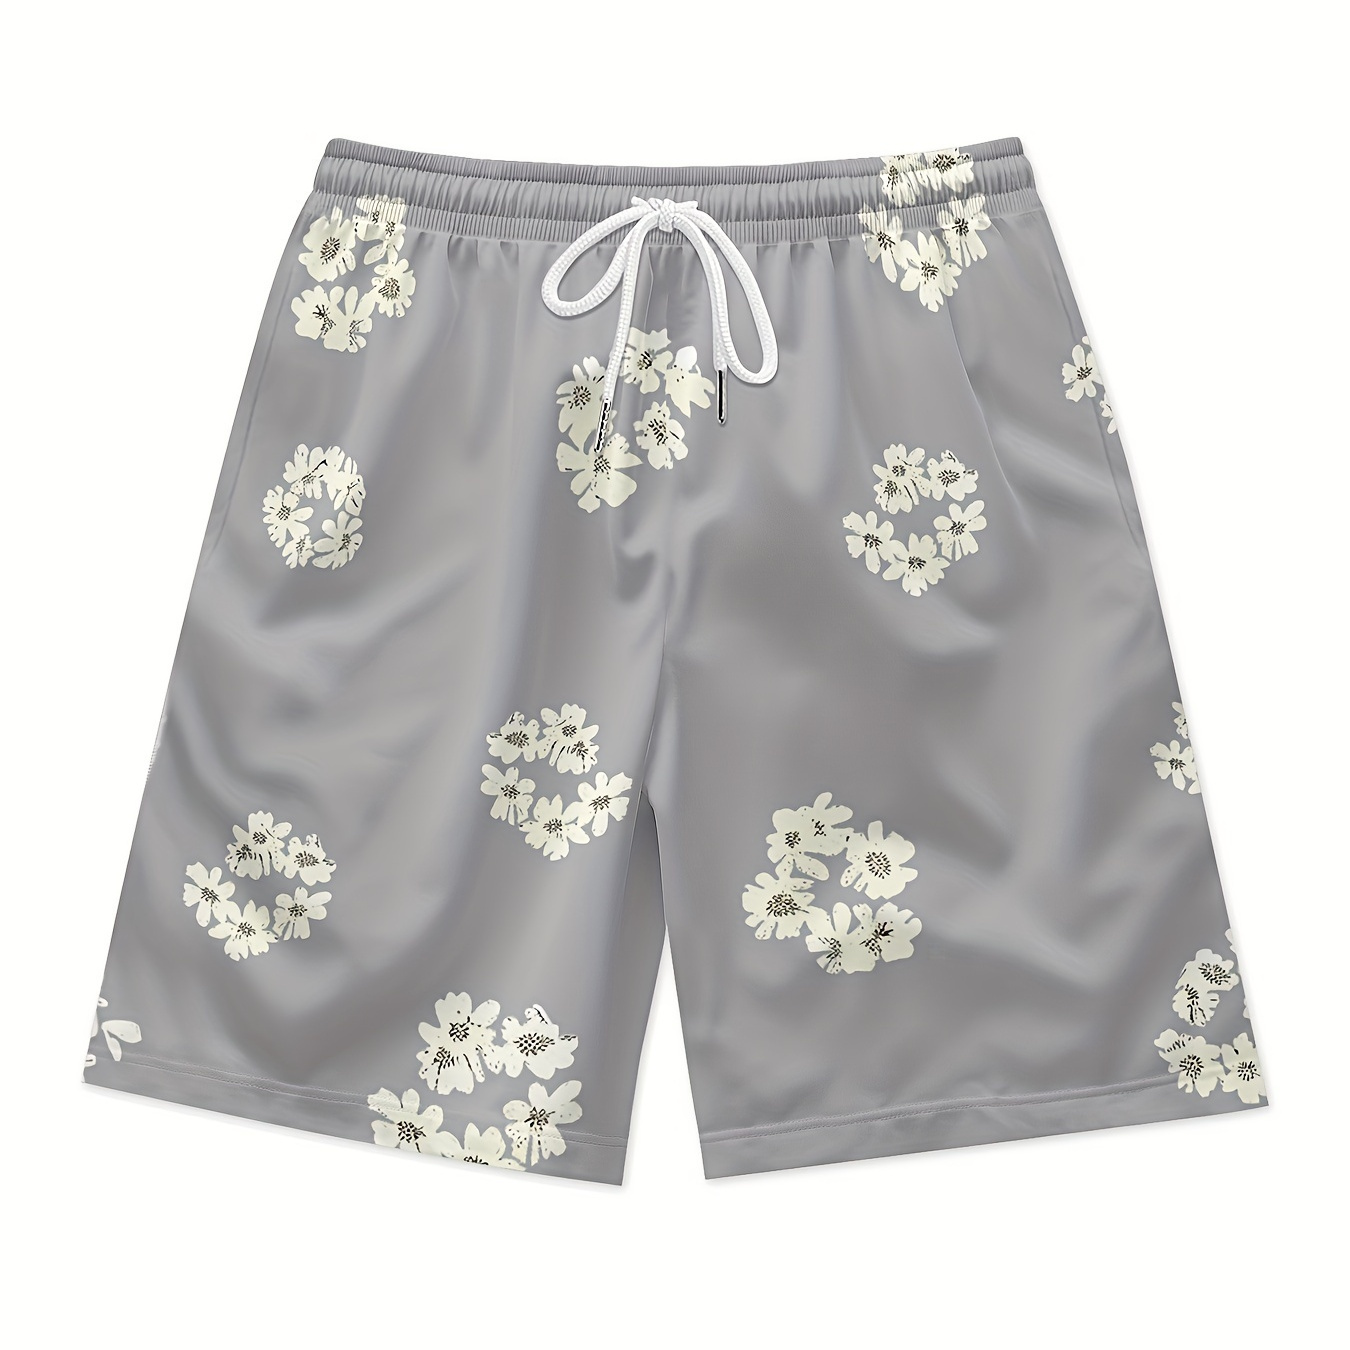 

Floral Print Men's Gray Waist Shorts Quick Dry Breathable Polyester Shorts Daily Streetwear Vacation Shorts Clothing Bottoms